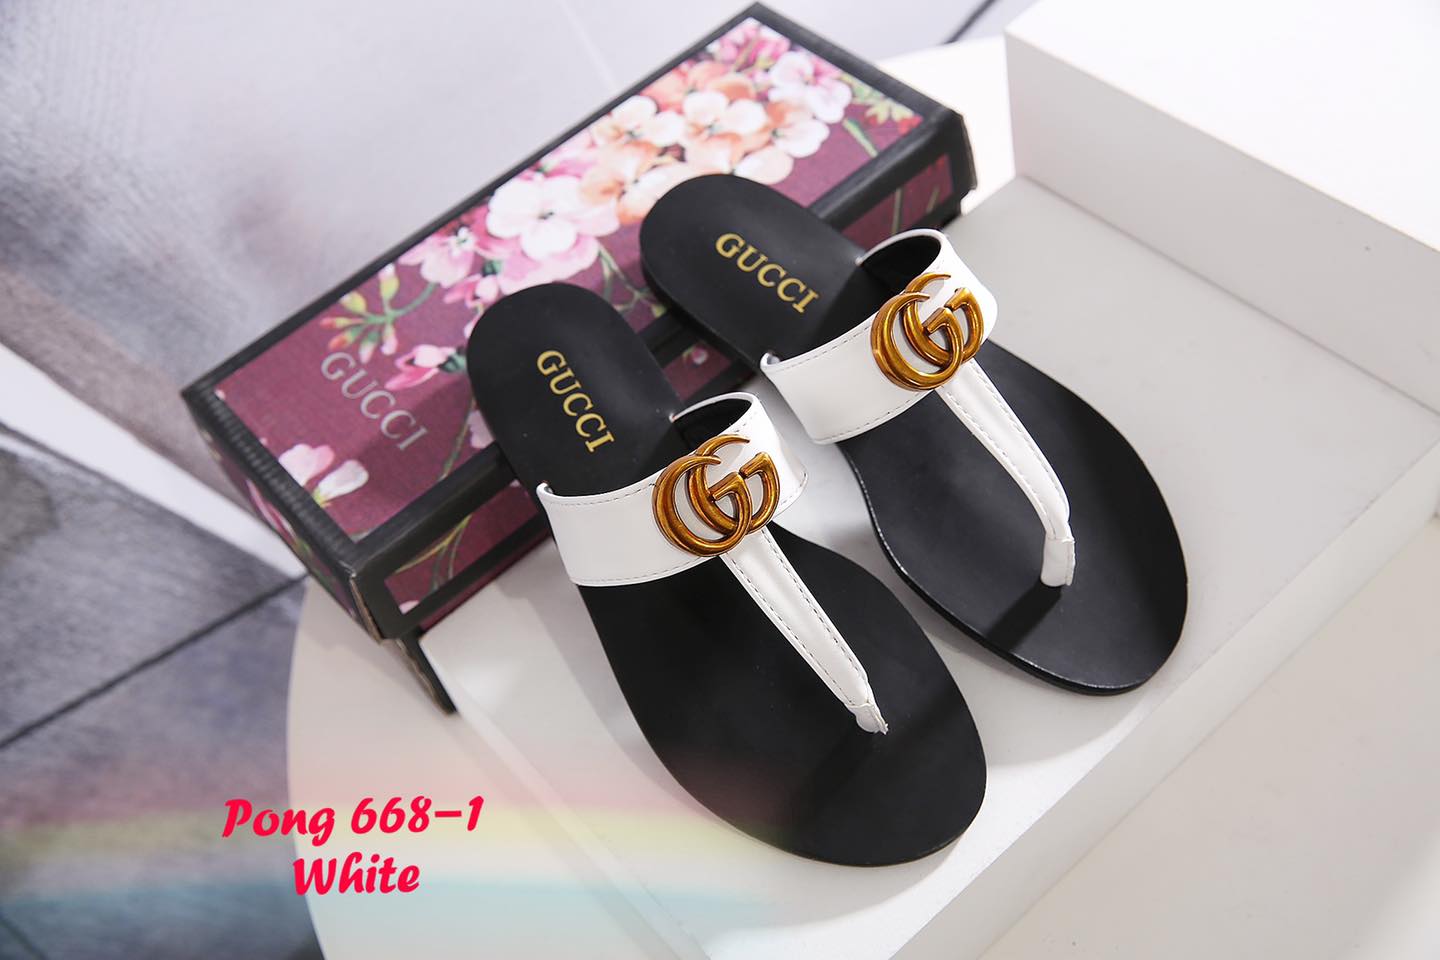 GG668-1 Double G Leather Thong Sandals Shoes StyleMoto White 37 